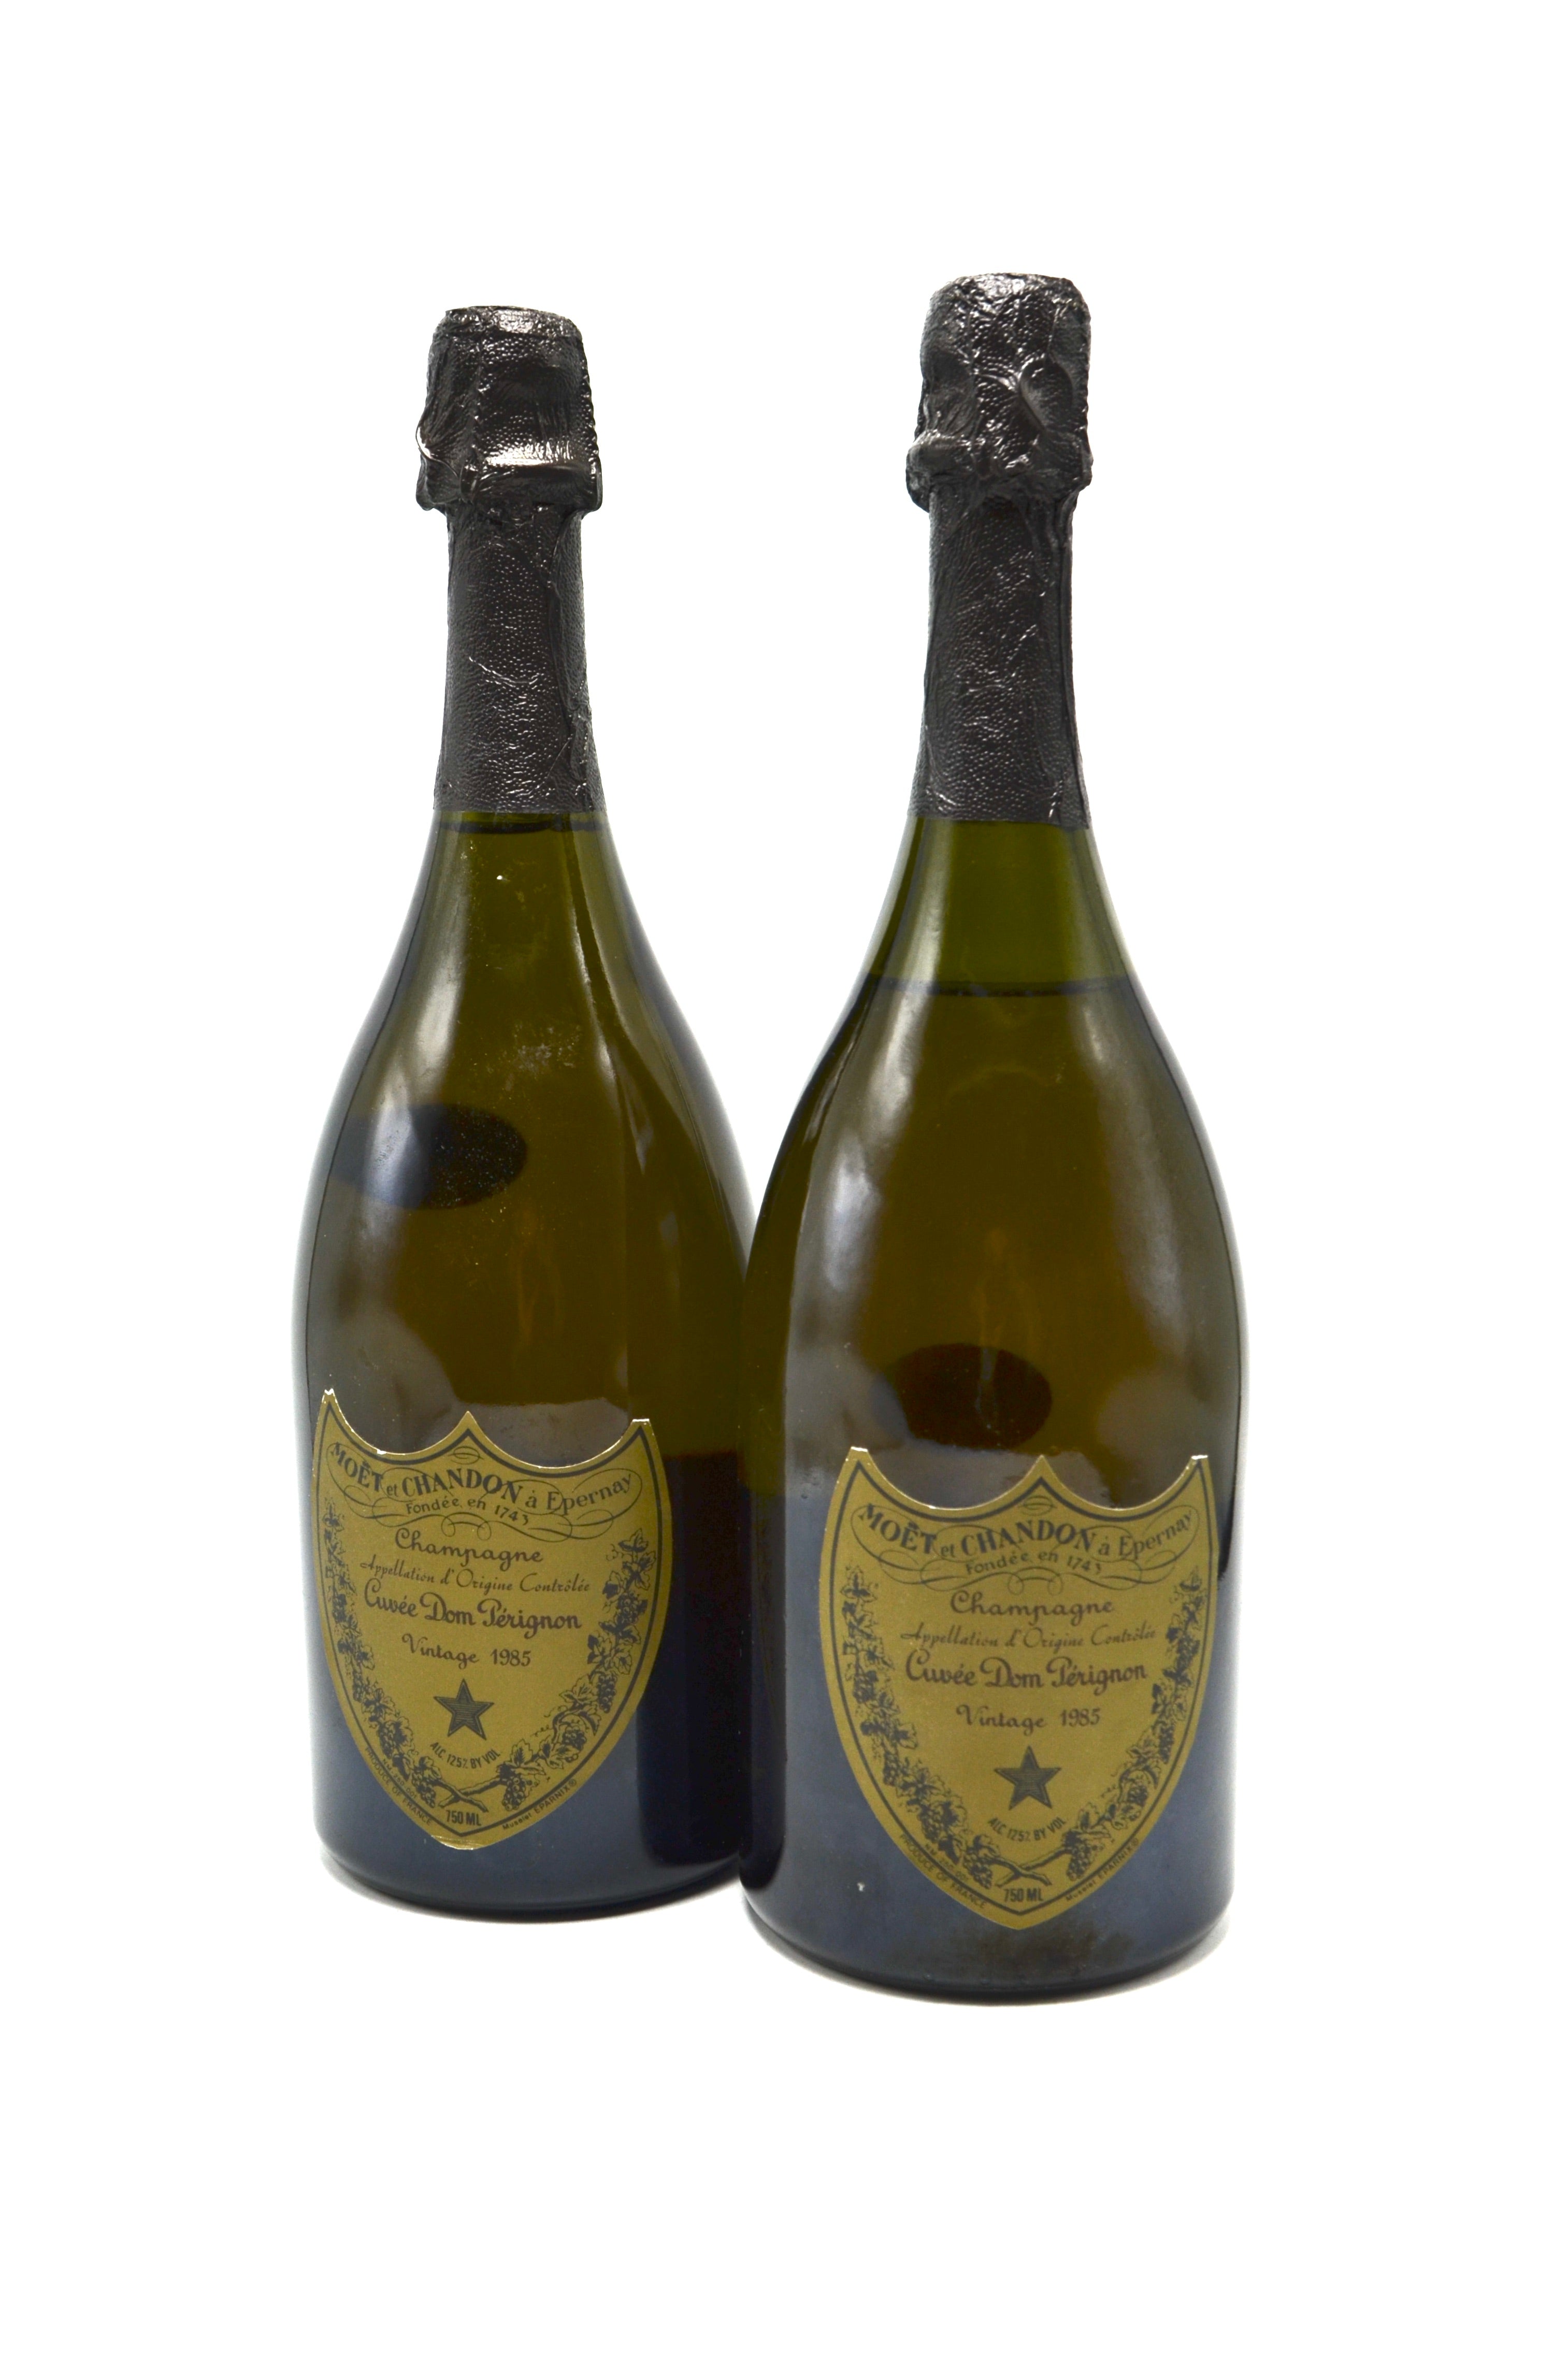 Dom Pérignon Champagne Price: How Much Is a Bottle?